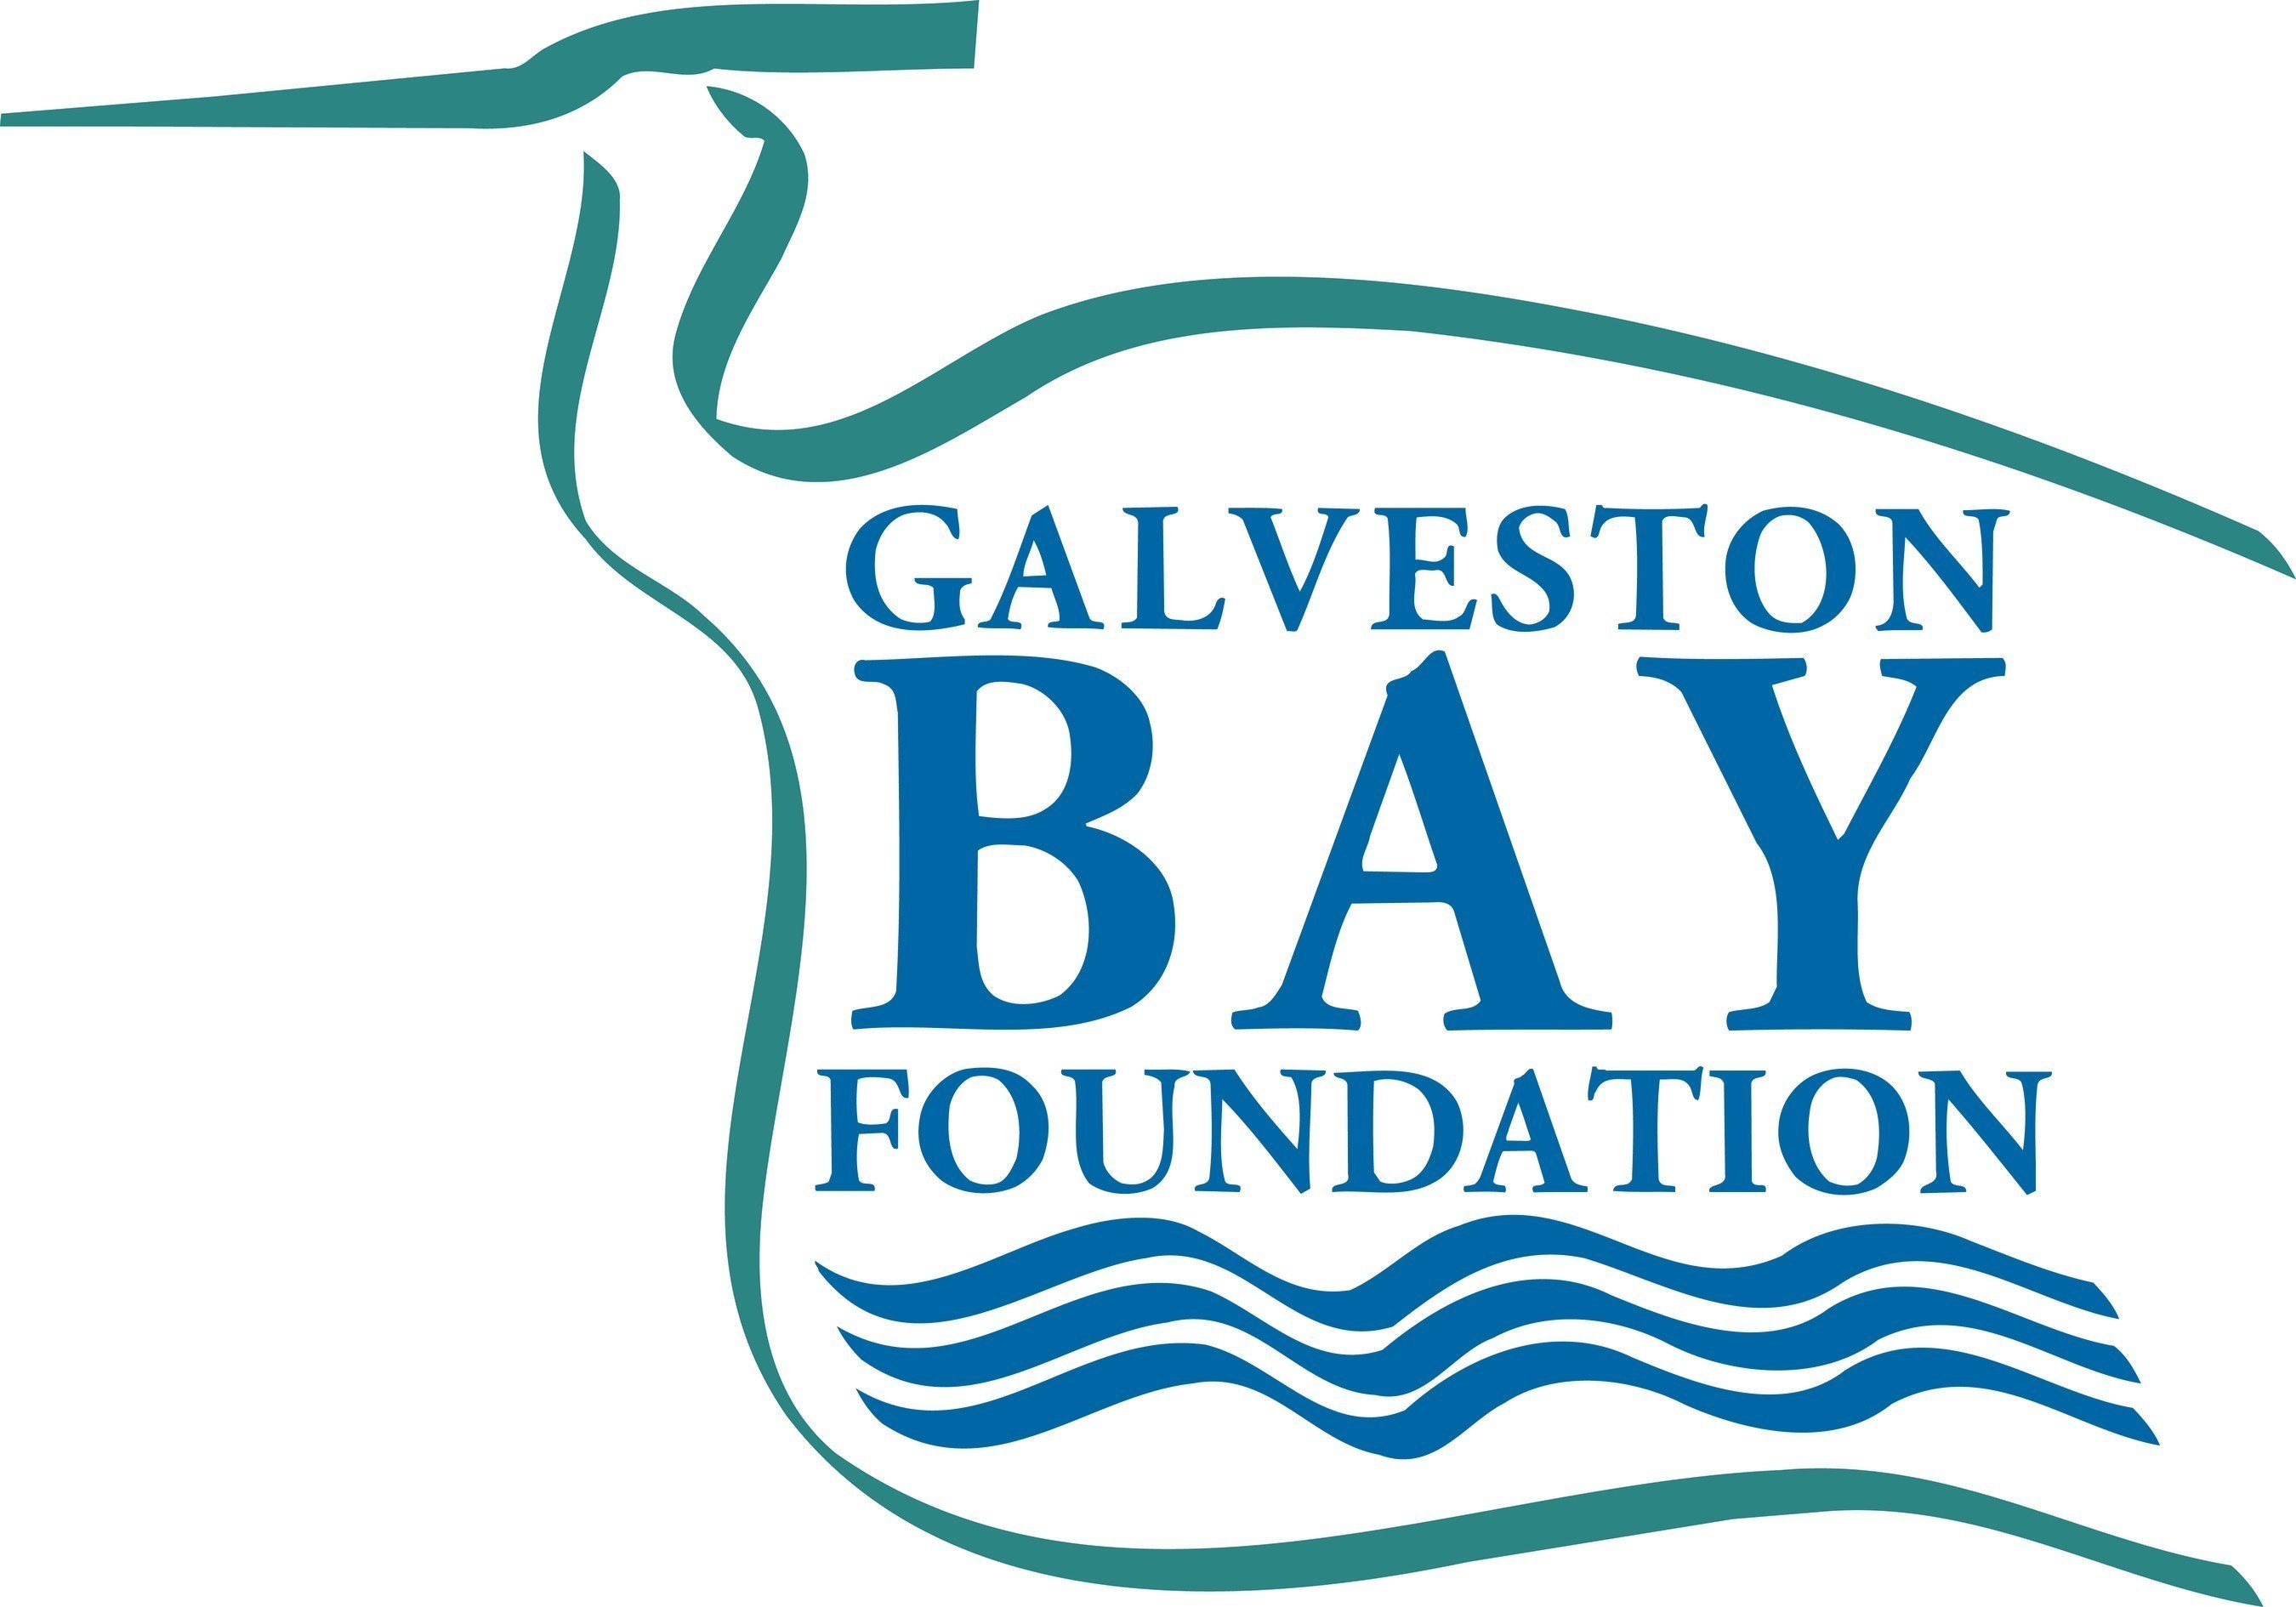 The Galveston Bay Foundation and the Houston Advanced Research Center have released the second annual Galveston Bay Report Card, an easy-to-understand grading system to communicate the health of the Bay to the public.